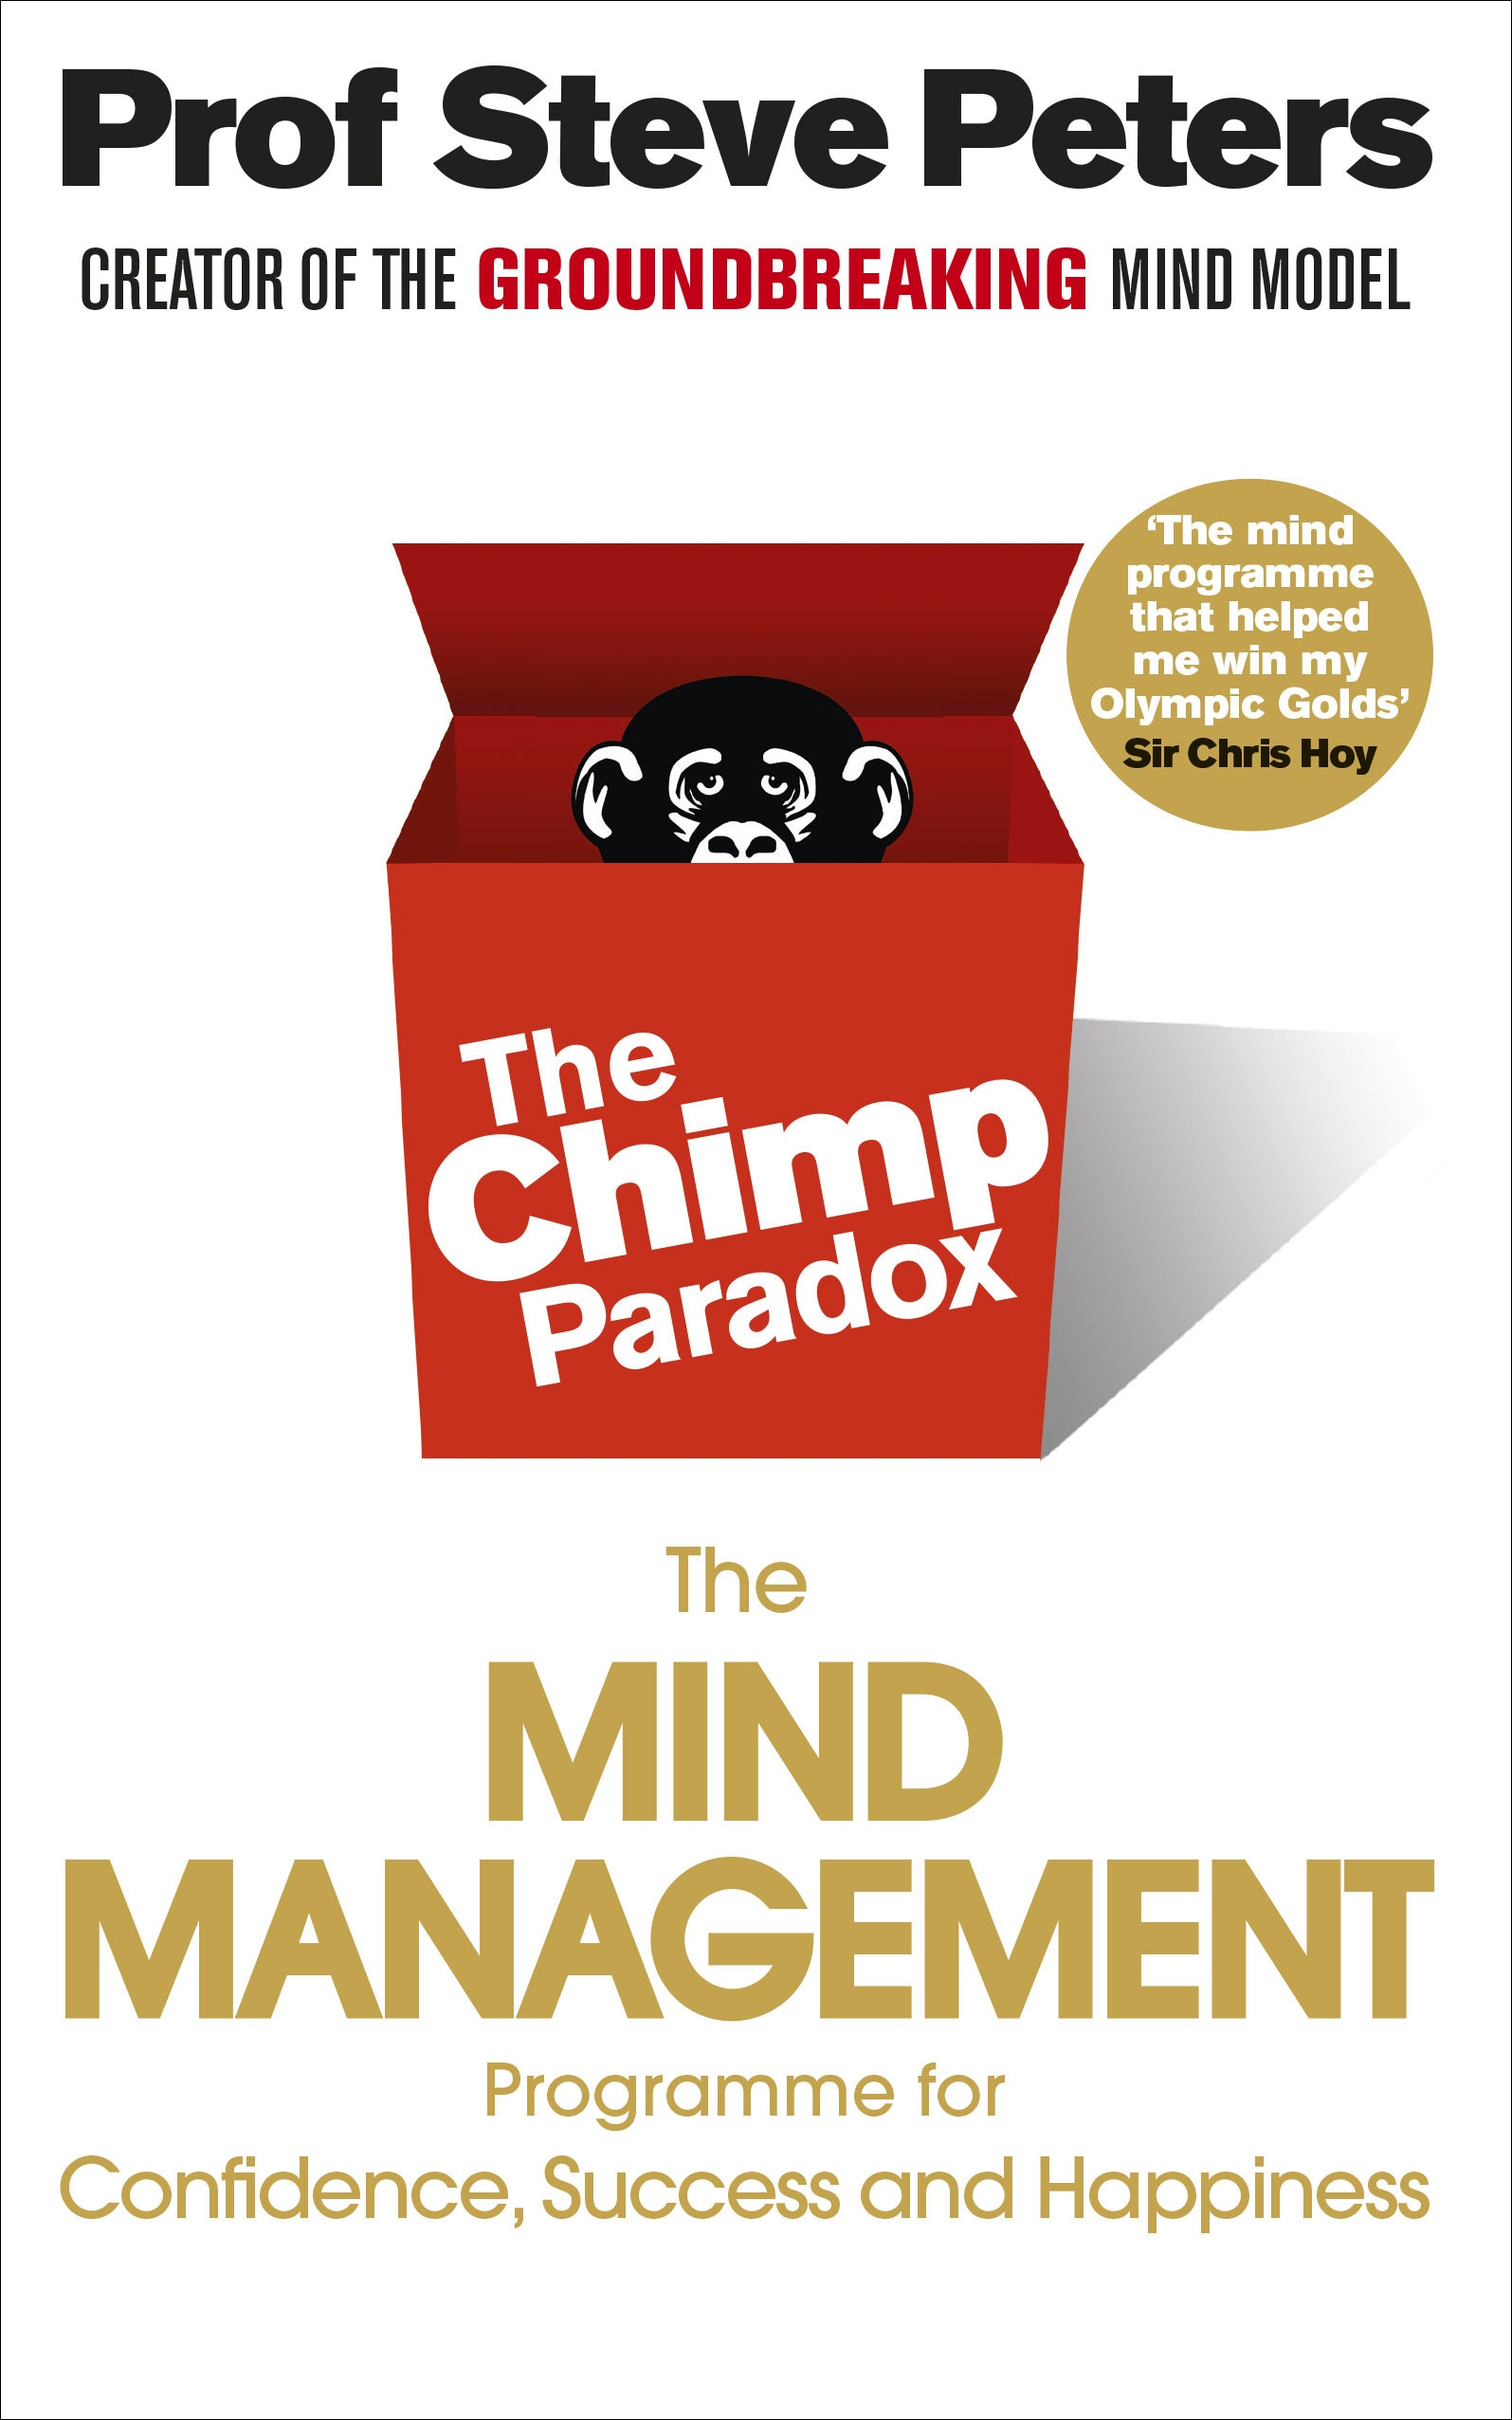 Book “The Chimp Paradox” by Prof Steve Peters — January 5, 2012